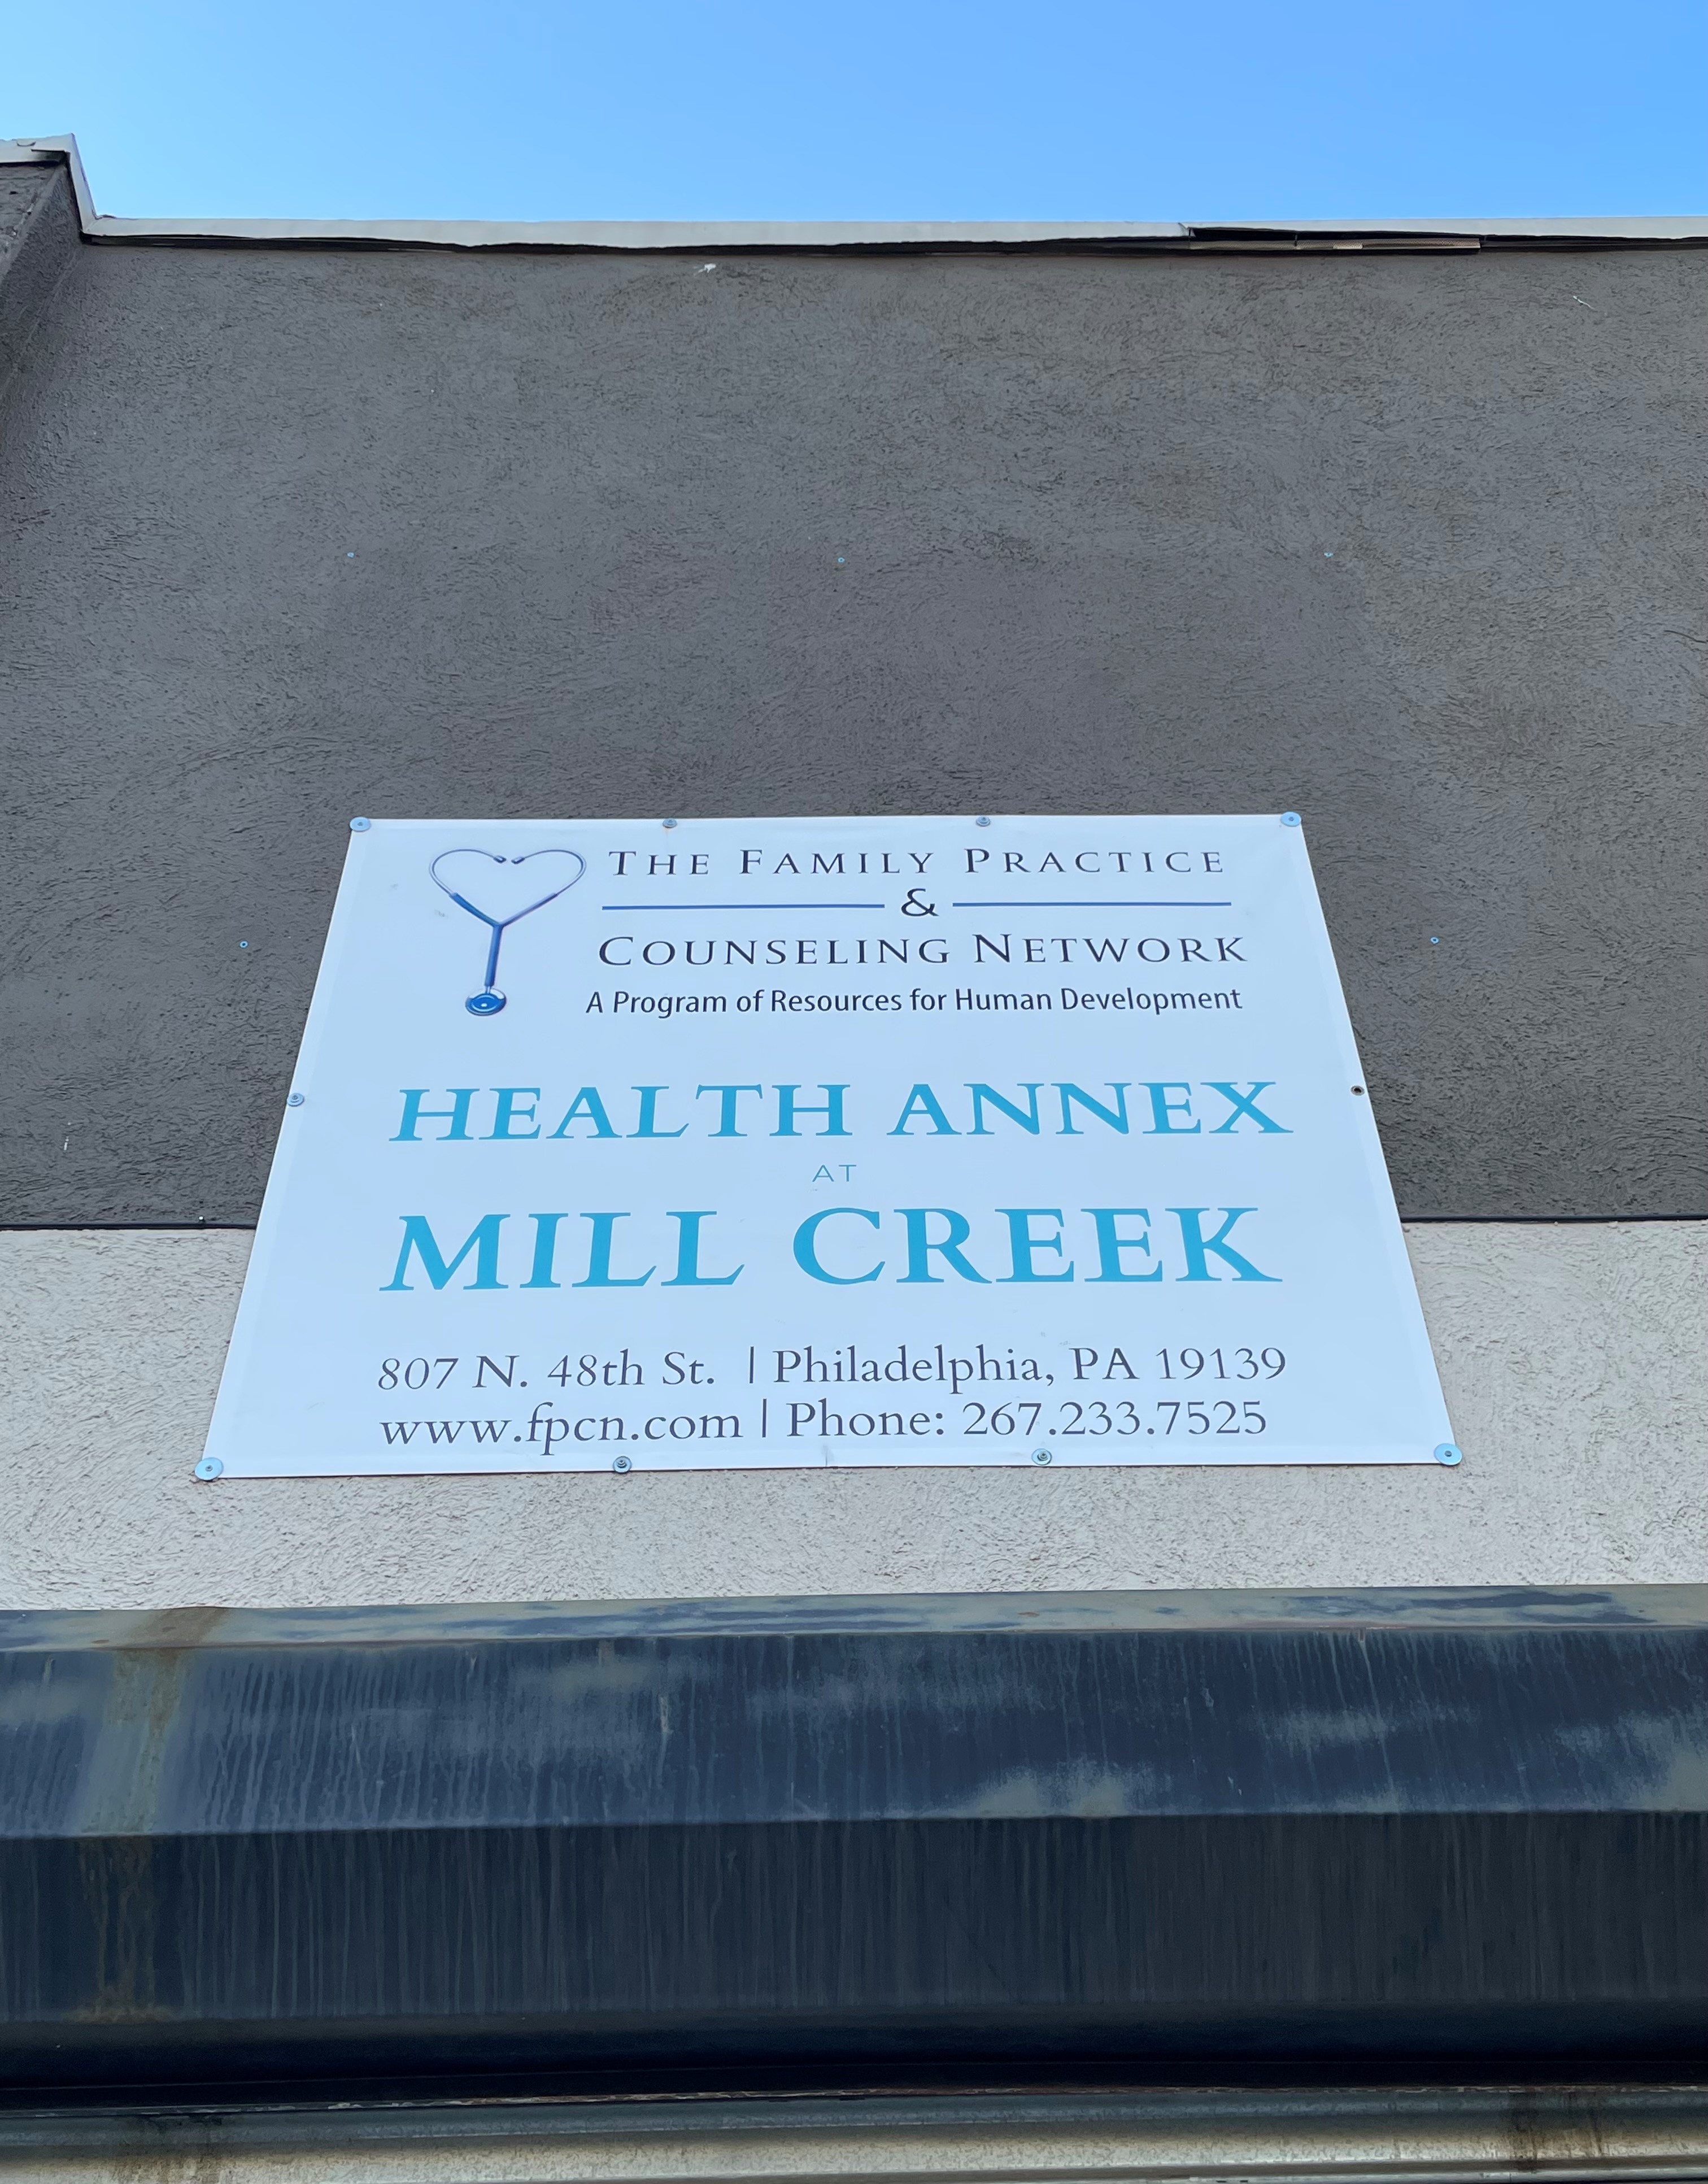 A sign having on a concrete wall that says "Health Annex at Mill Creek"